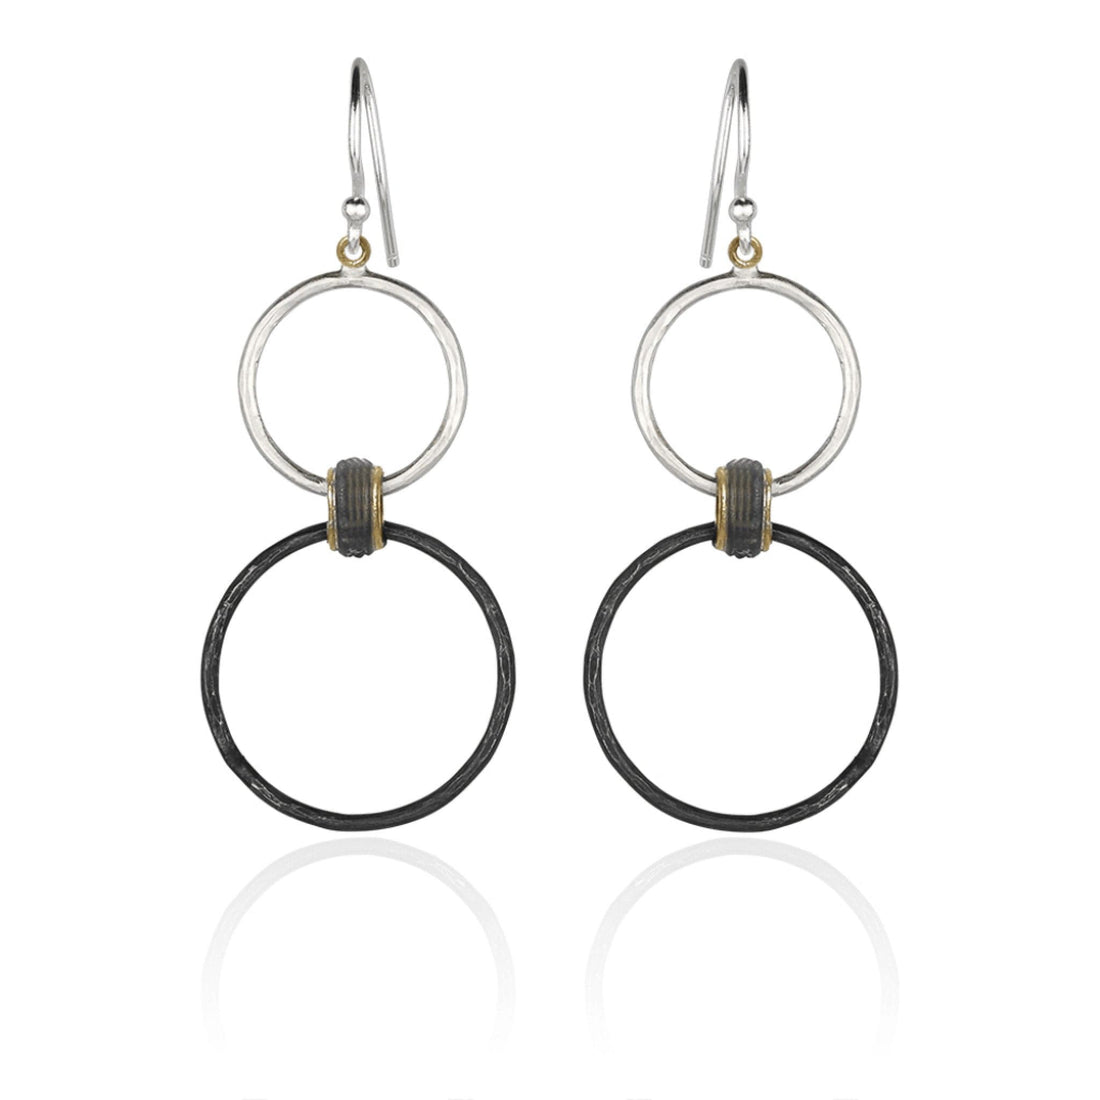 Sterling Silver Bubble Earrings with 24k Gold Accents by Lika Behar